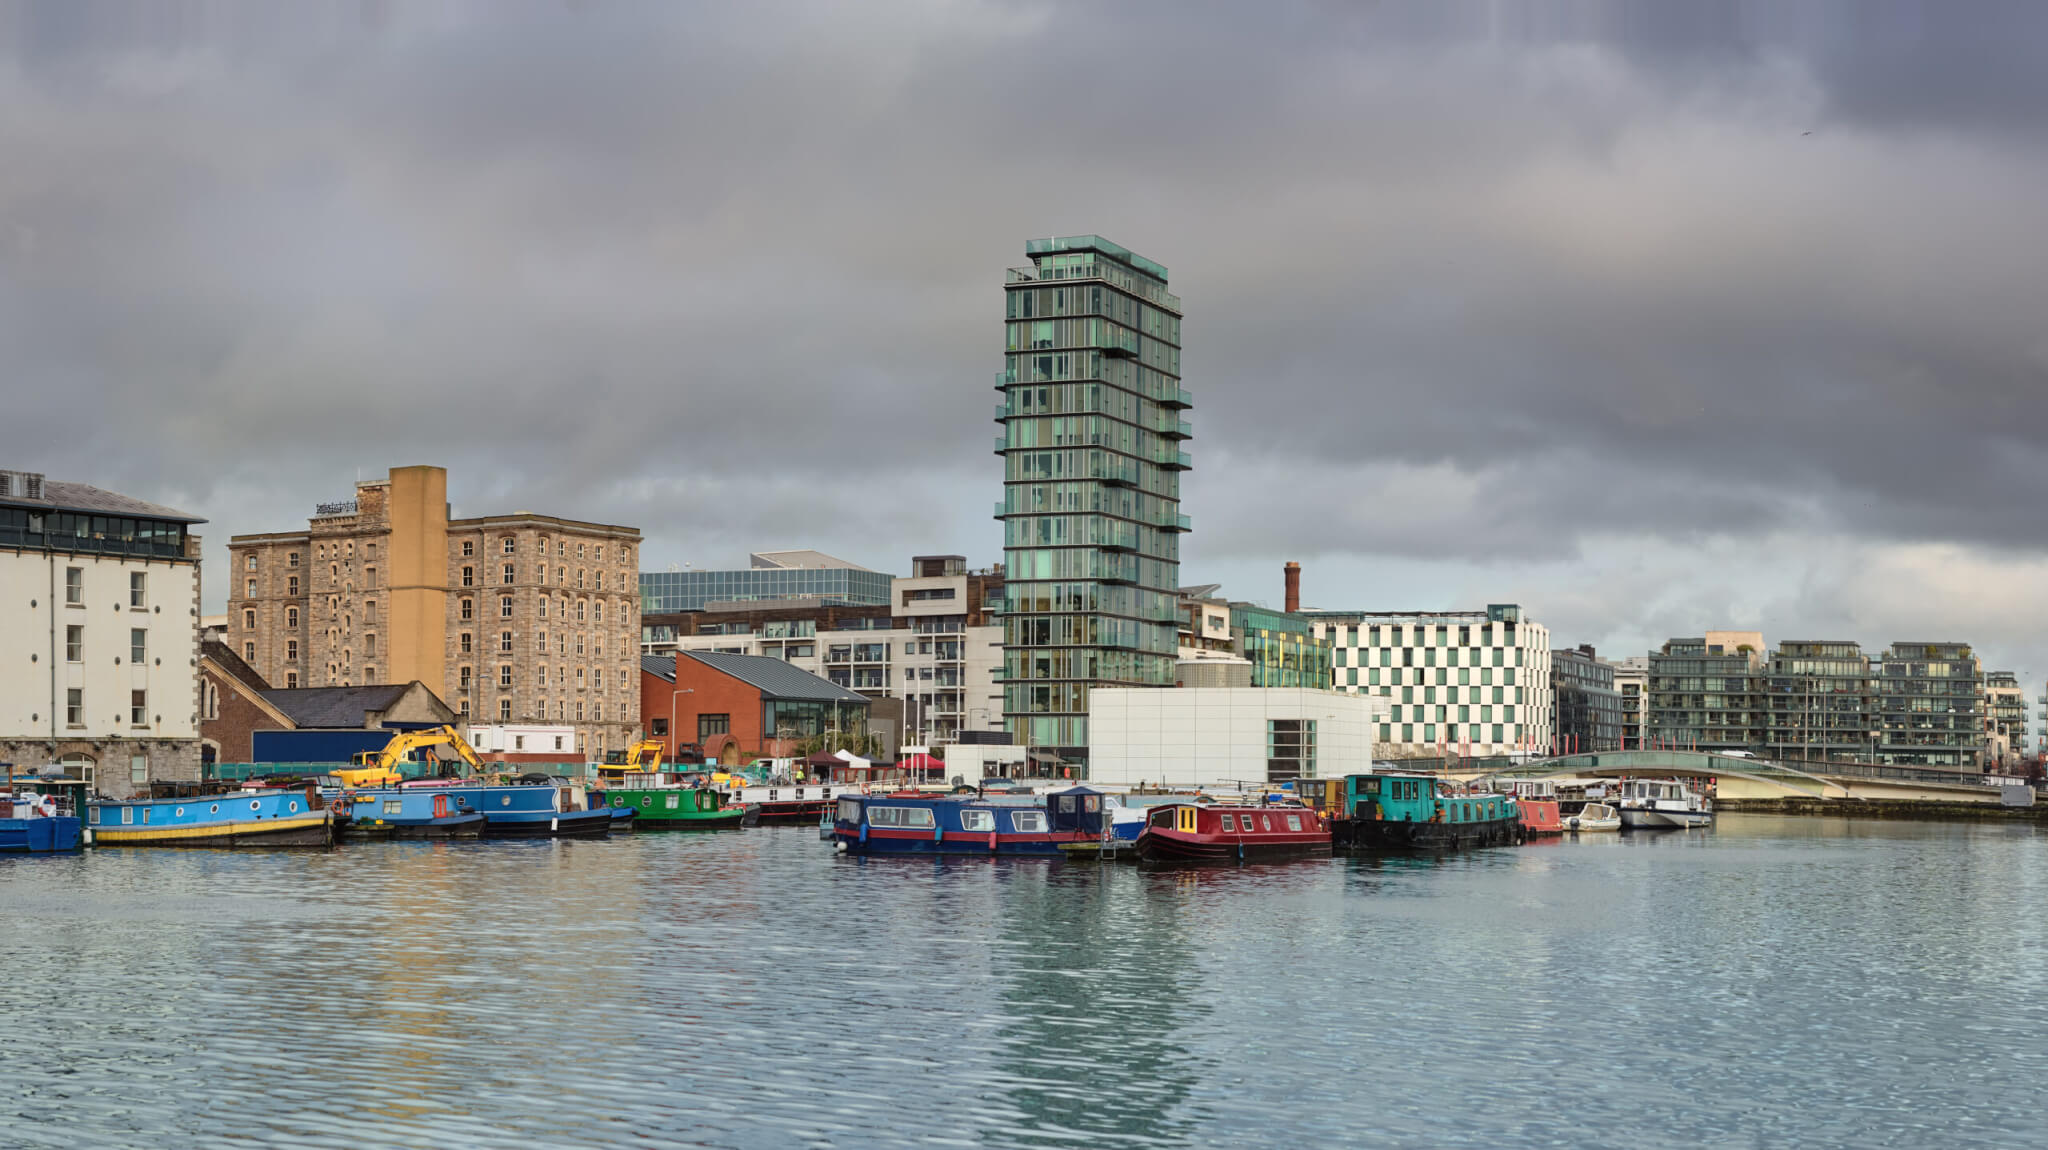 Modern part of Dublin Docklands, known as Silicon Docks